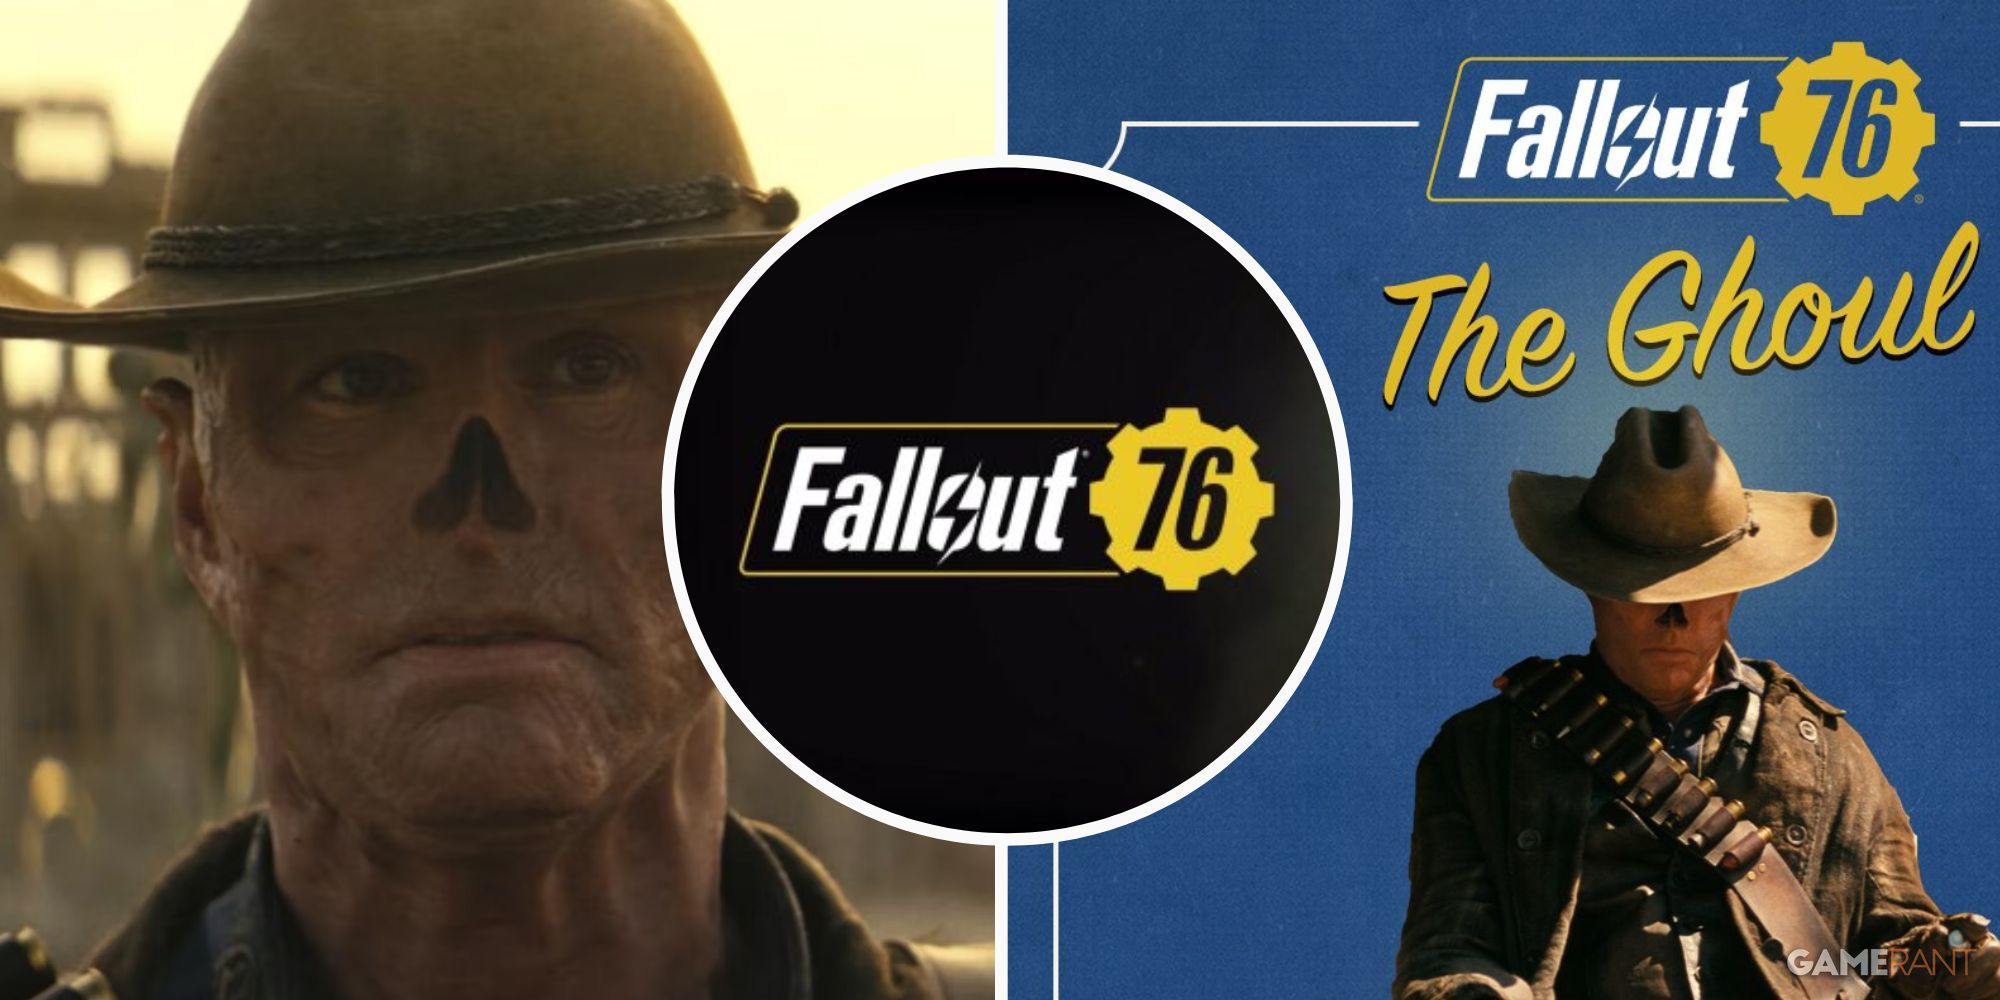 Fallout 76 - The Ghoul Split Image